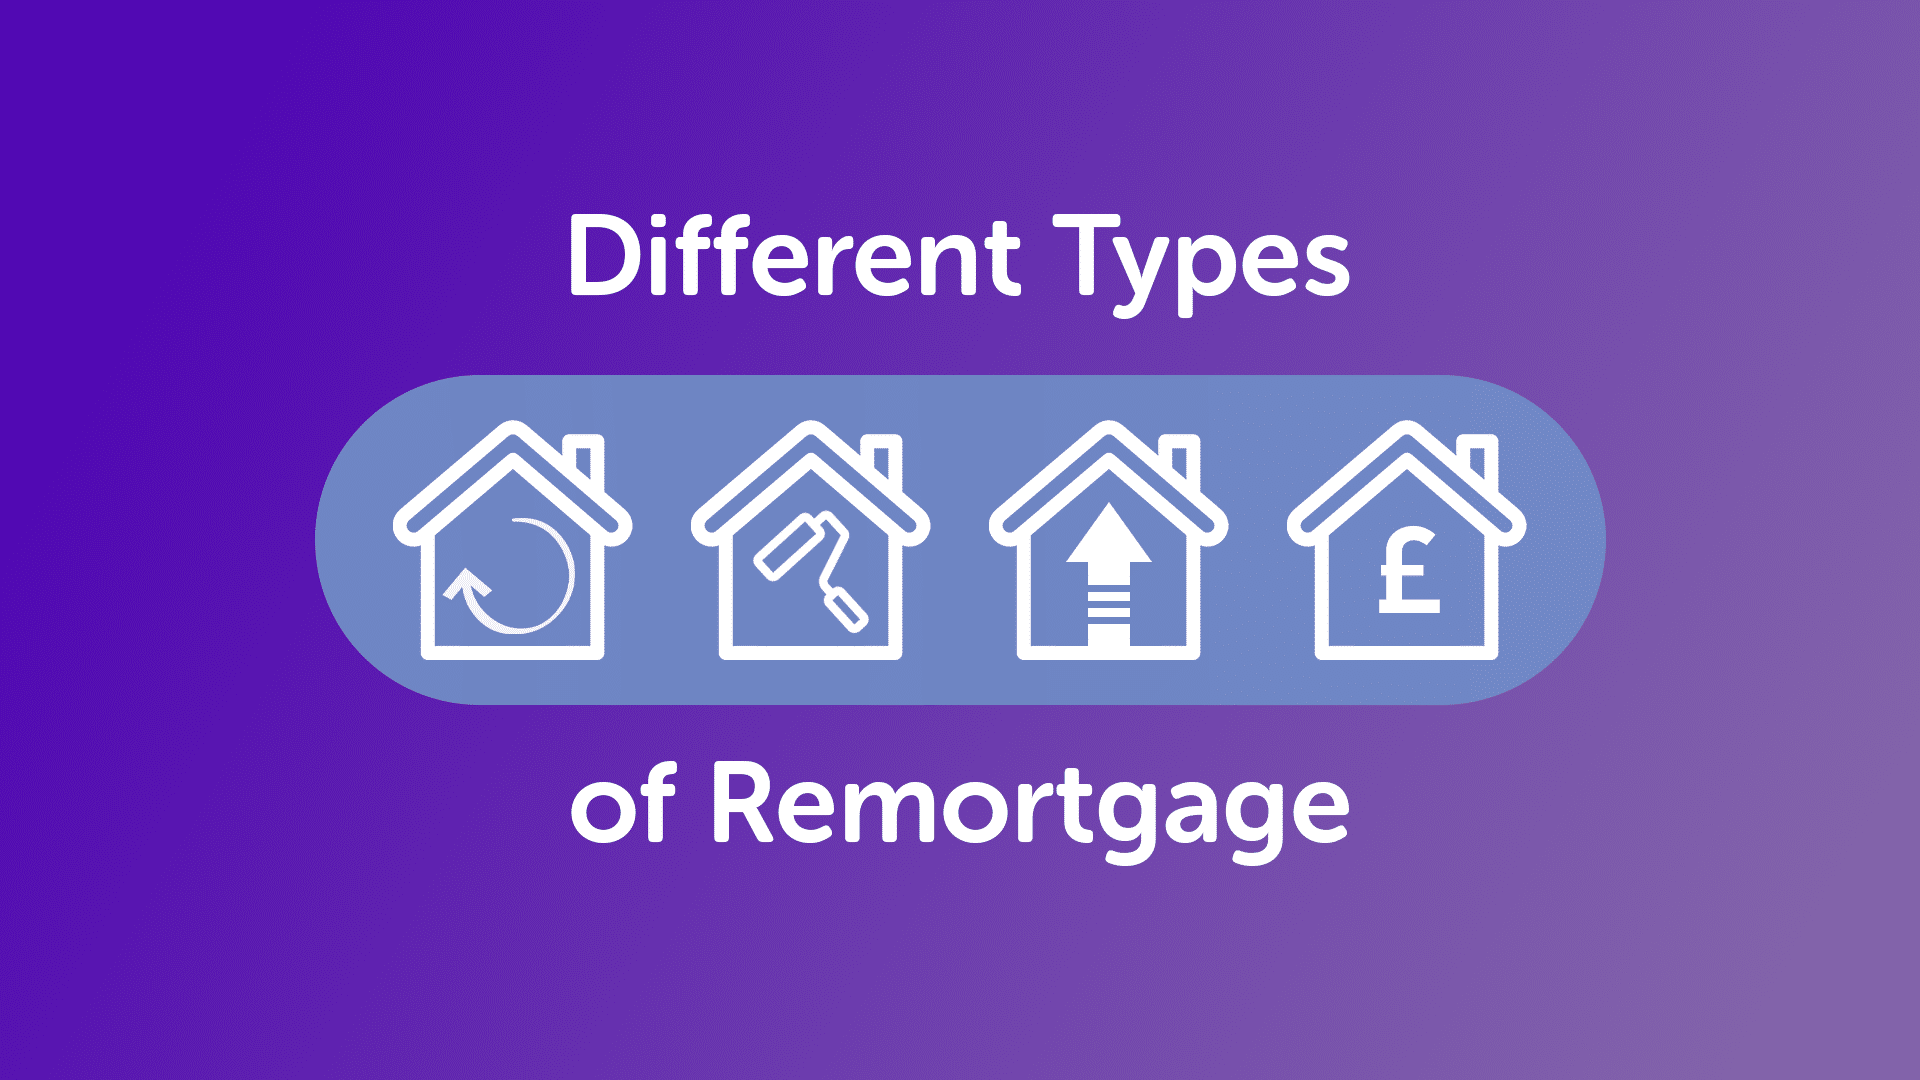 Different Types of Remortgage